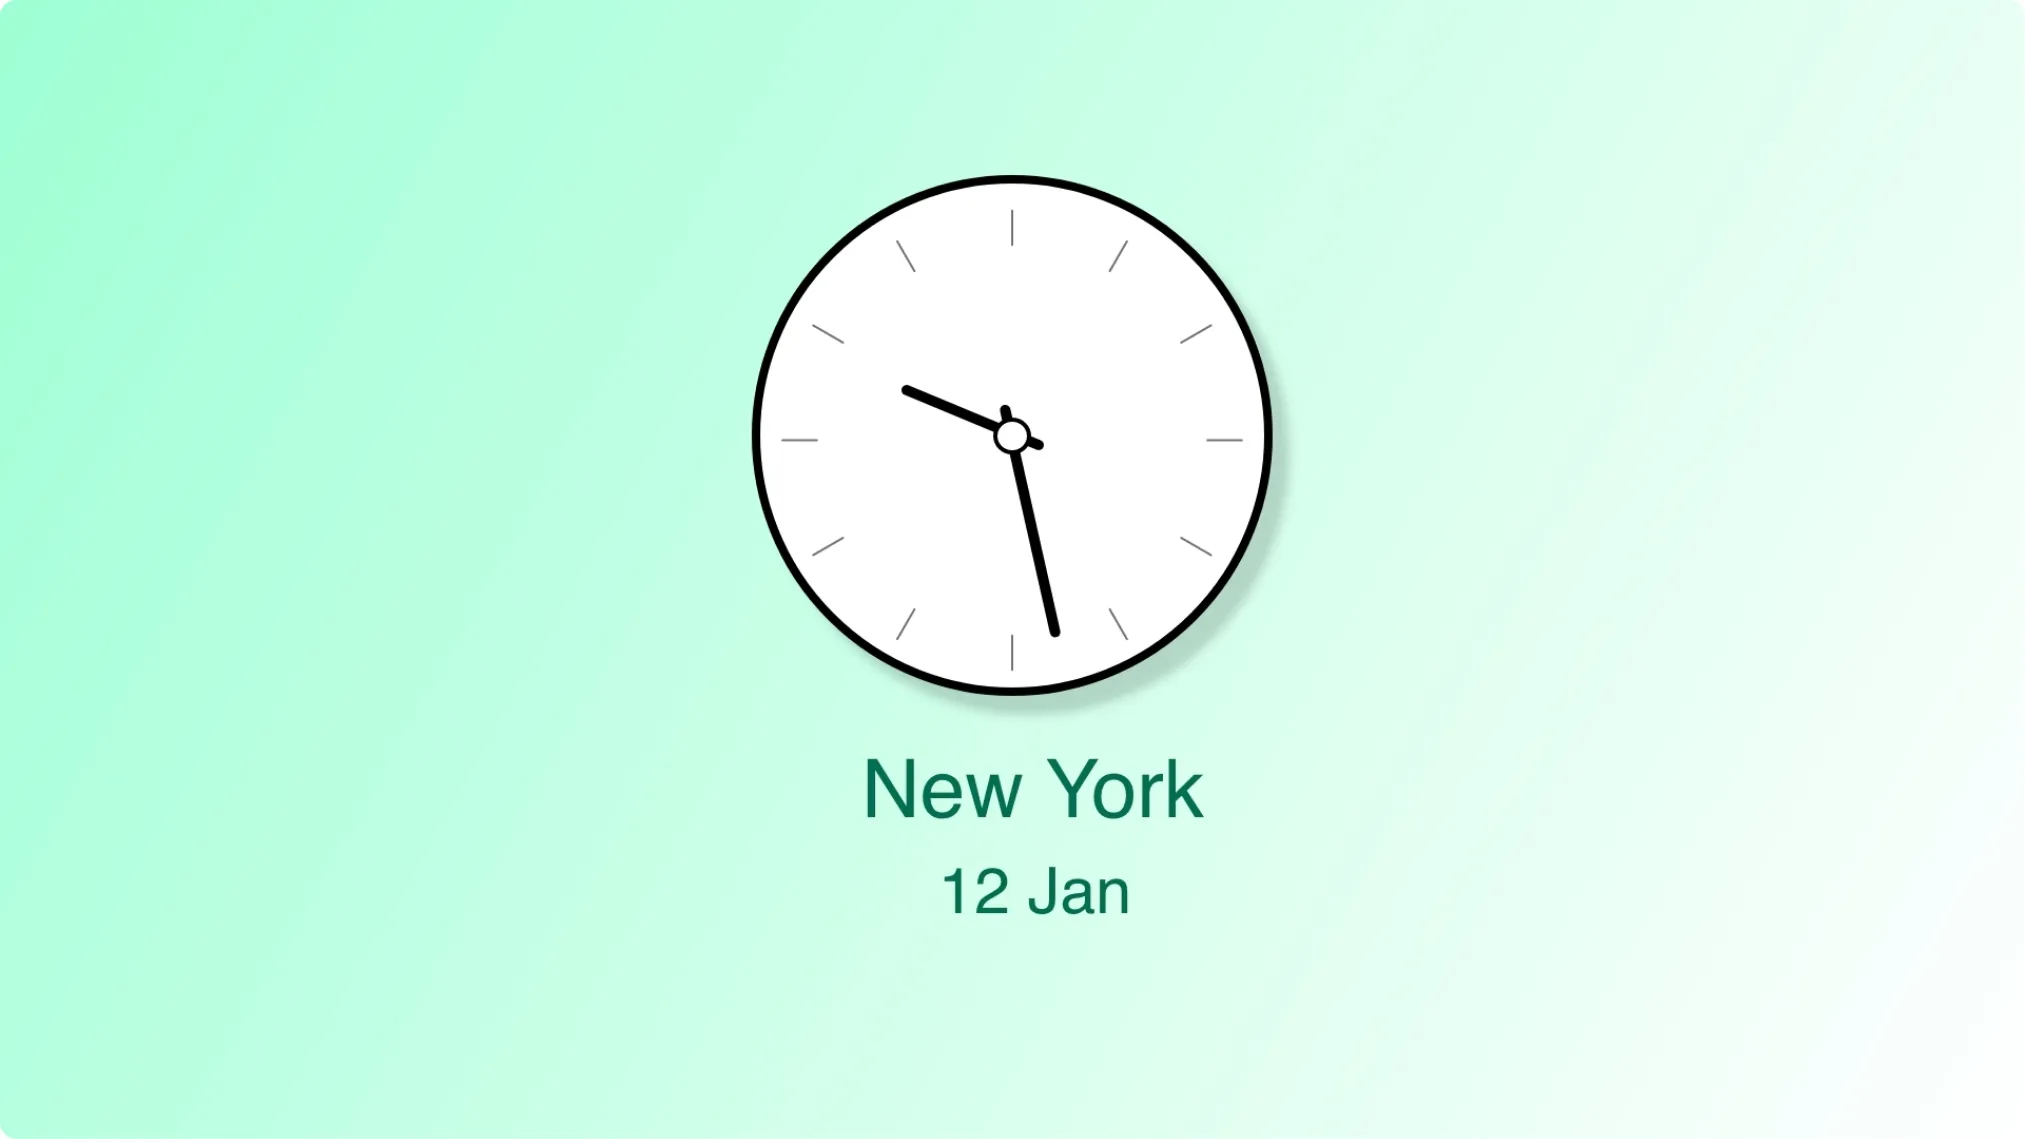 Clock app layout preview showing blue gradient as background, analog clock format and New York country.